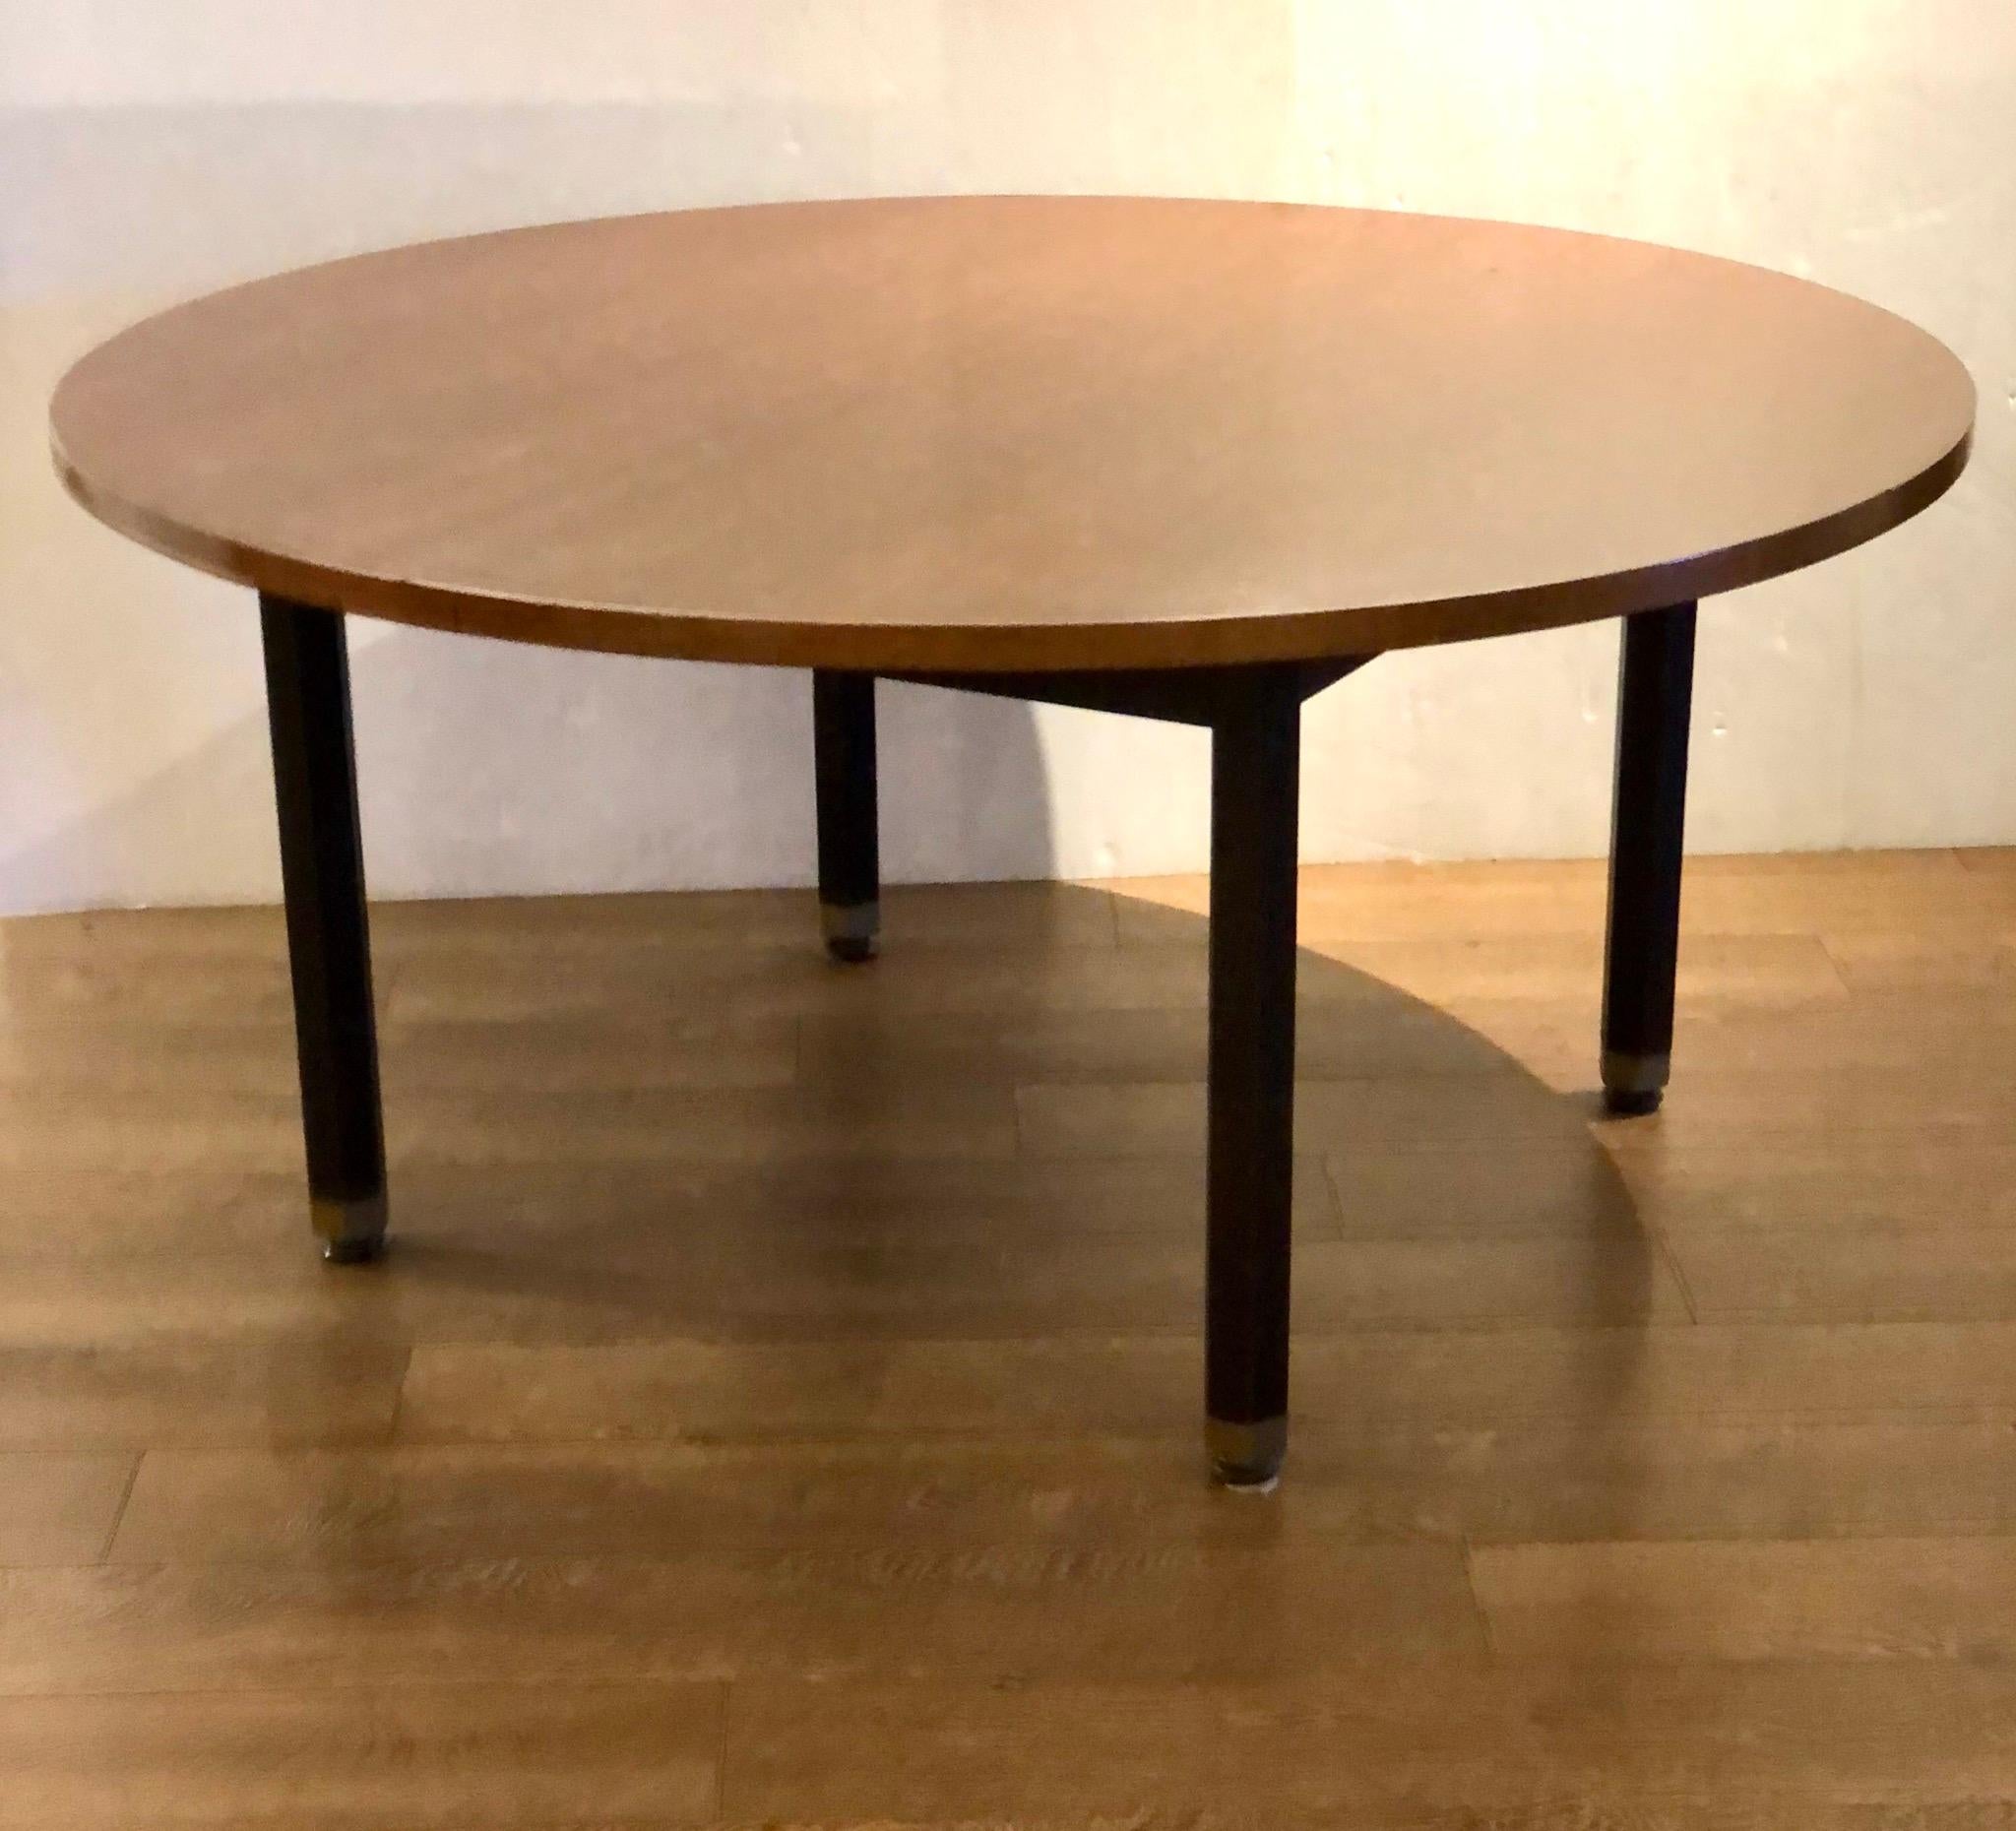 Elegant low game table in walnut top with mahogany base and brass accents feet, circa 1950s in its original finish very clean for its age has a nice look.